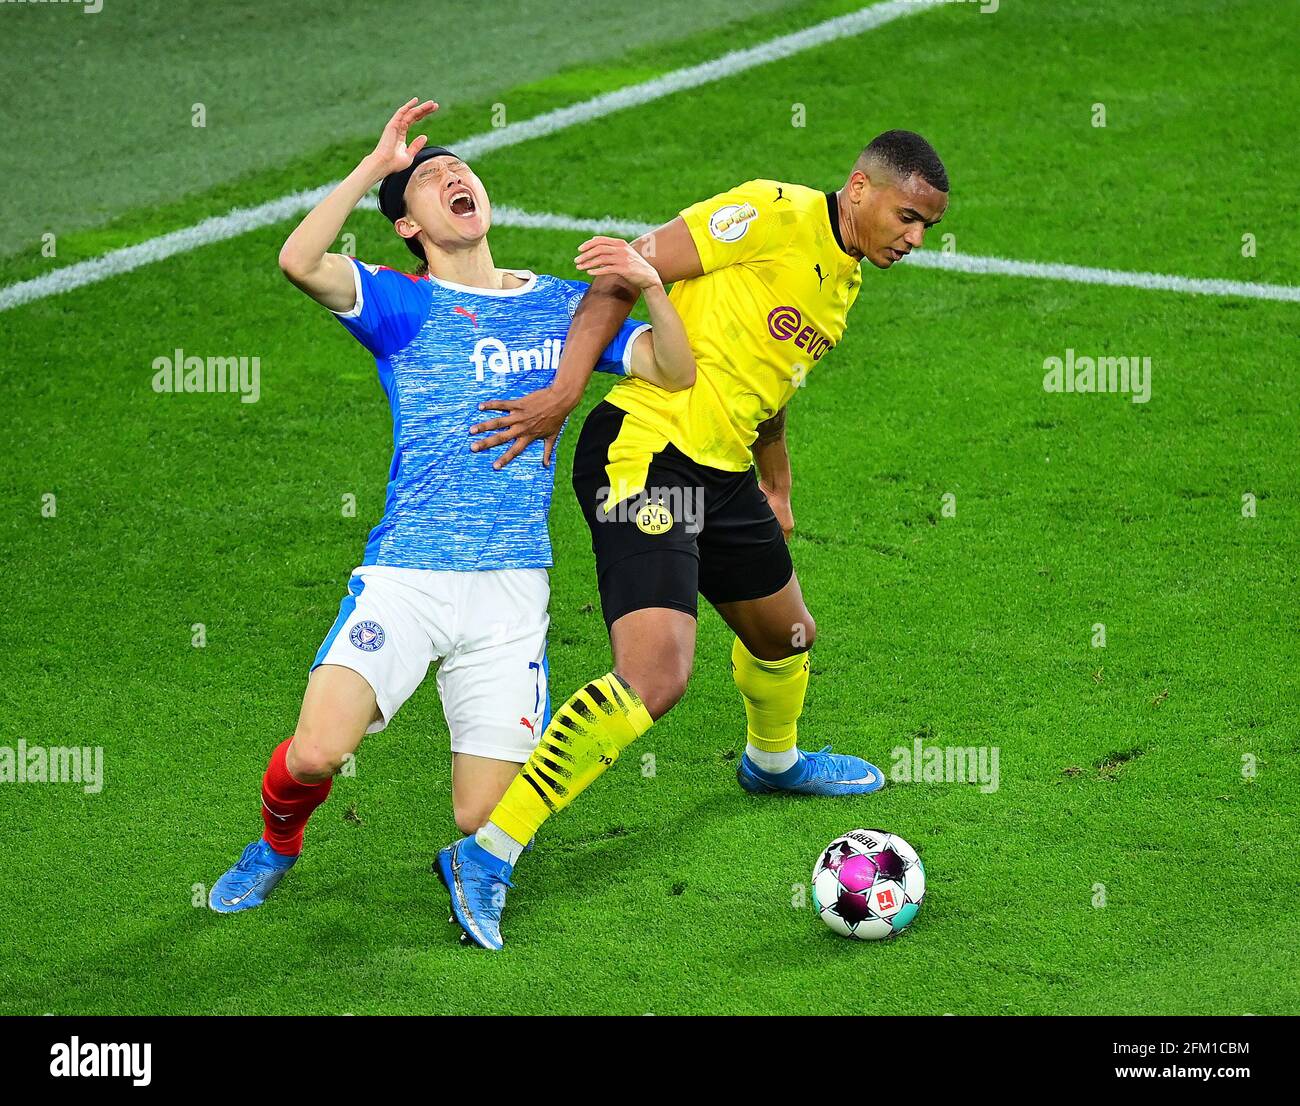 left to right Jae Sung LEE (KI), Manuel AKANJI (DO), action, duels, football DFB Pokal, semi-finals, Borussia Dortmund (DO) - Holstein Kiel (KI) 5: 0, on May 1st, 2021 in Dortmund/Germany. Photo: TimGroothuis/Witters/pool via Fotoagentur SVEN SIMON # DFB regulations prohibit any use of photographs as image sequences and/or quasi-video # Editorial Use ONLY # National and International News Agencies OUT | usage worldwide Stock Photo